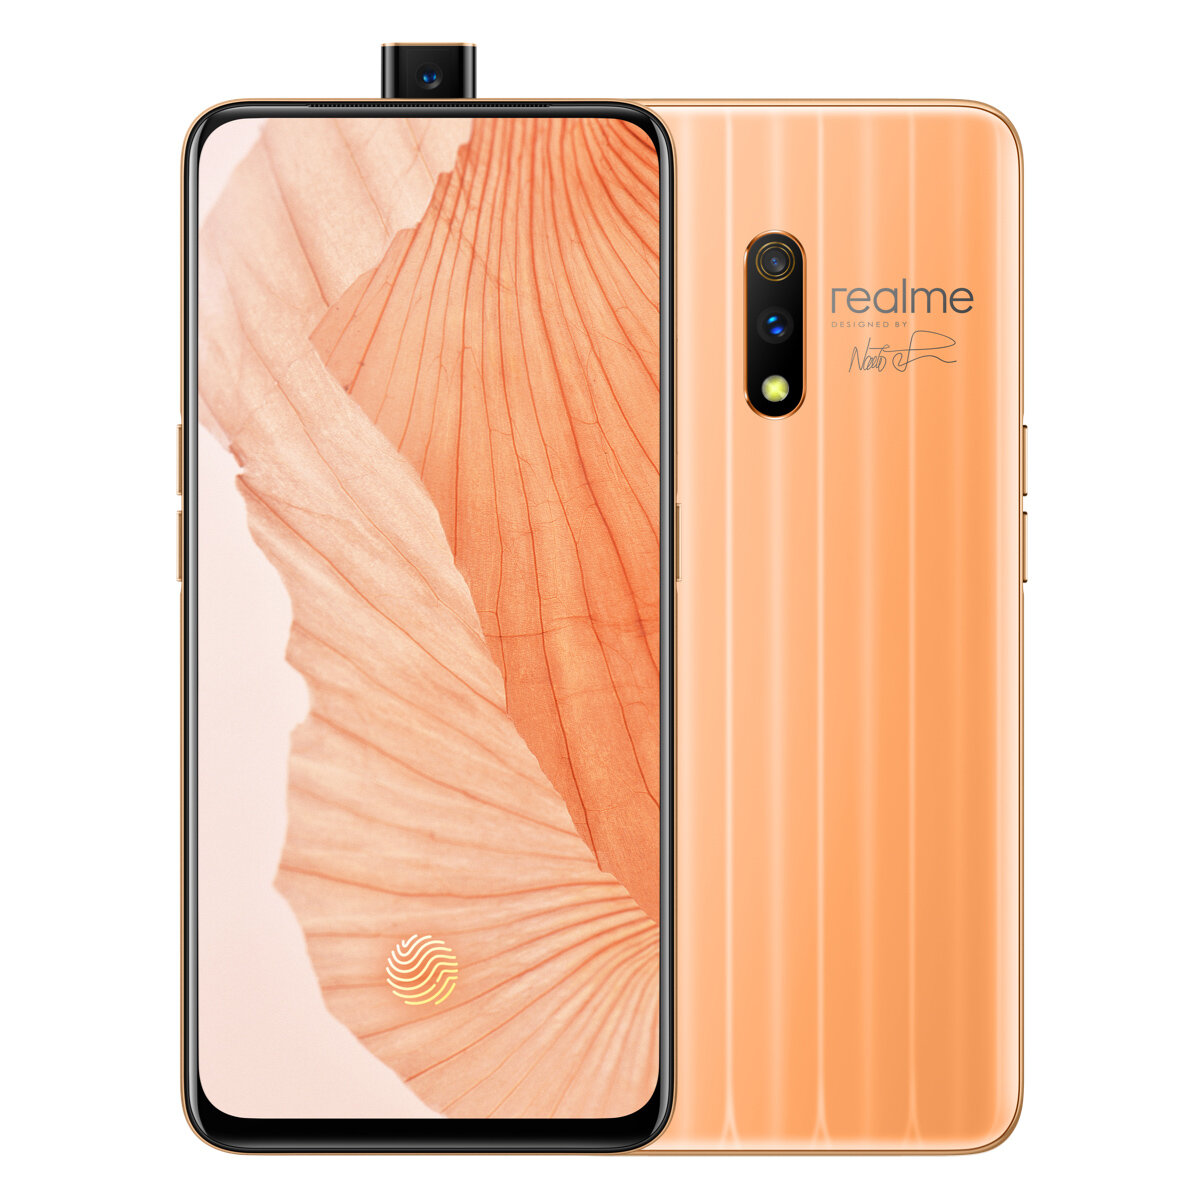 £323.05 33% OPPO Realme X Special Edition 6.53 Inch FHD+ AMOLED 3765mAh 20W VOOC 3.0 4GB RAM 64GB ROM UFS 2.1 Snapdragon 710 Octa Core 2.2GHz 4G Smartphone Smartphones from Mobile Phones & Accessories on banggood.com